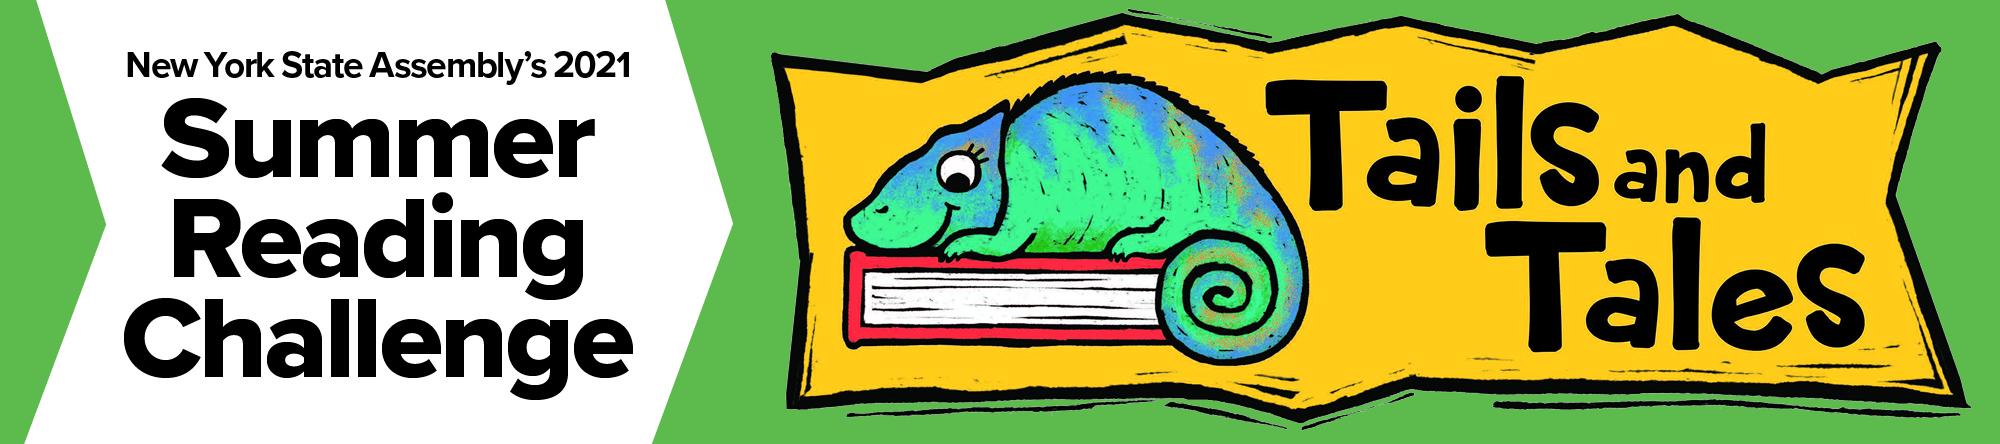 New York State Assembly's 2021 Summer Reading Challenge - Tails and Tales